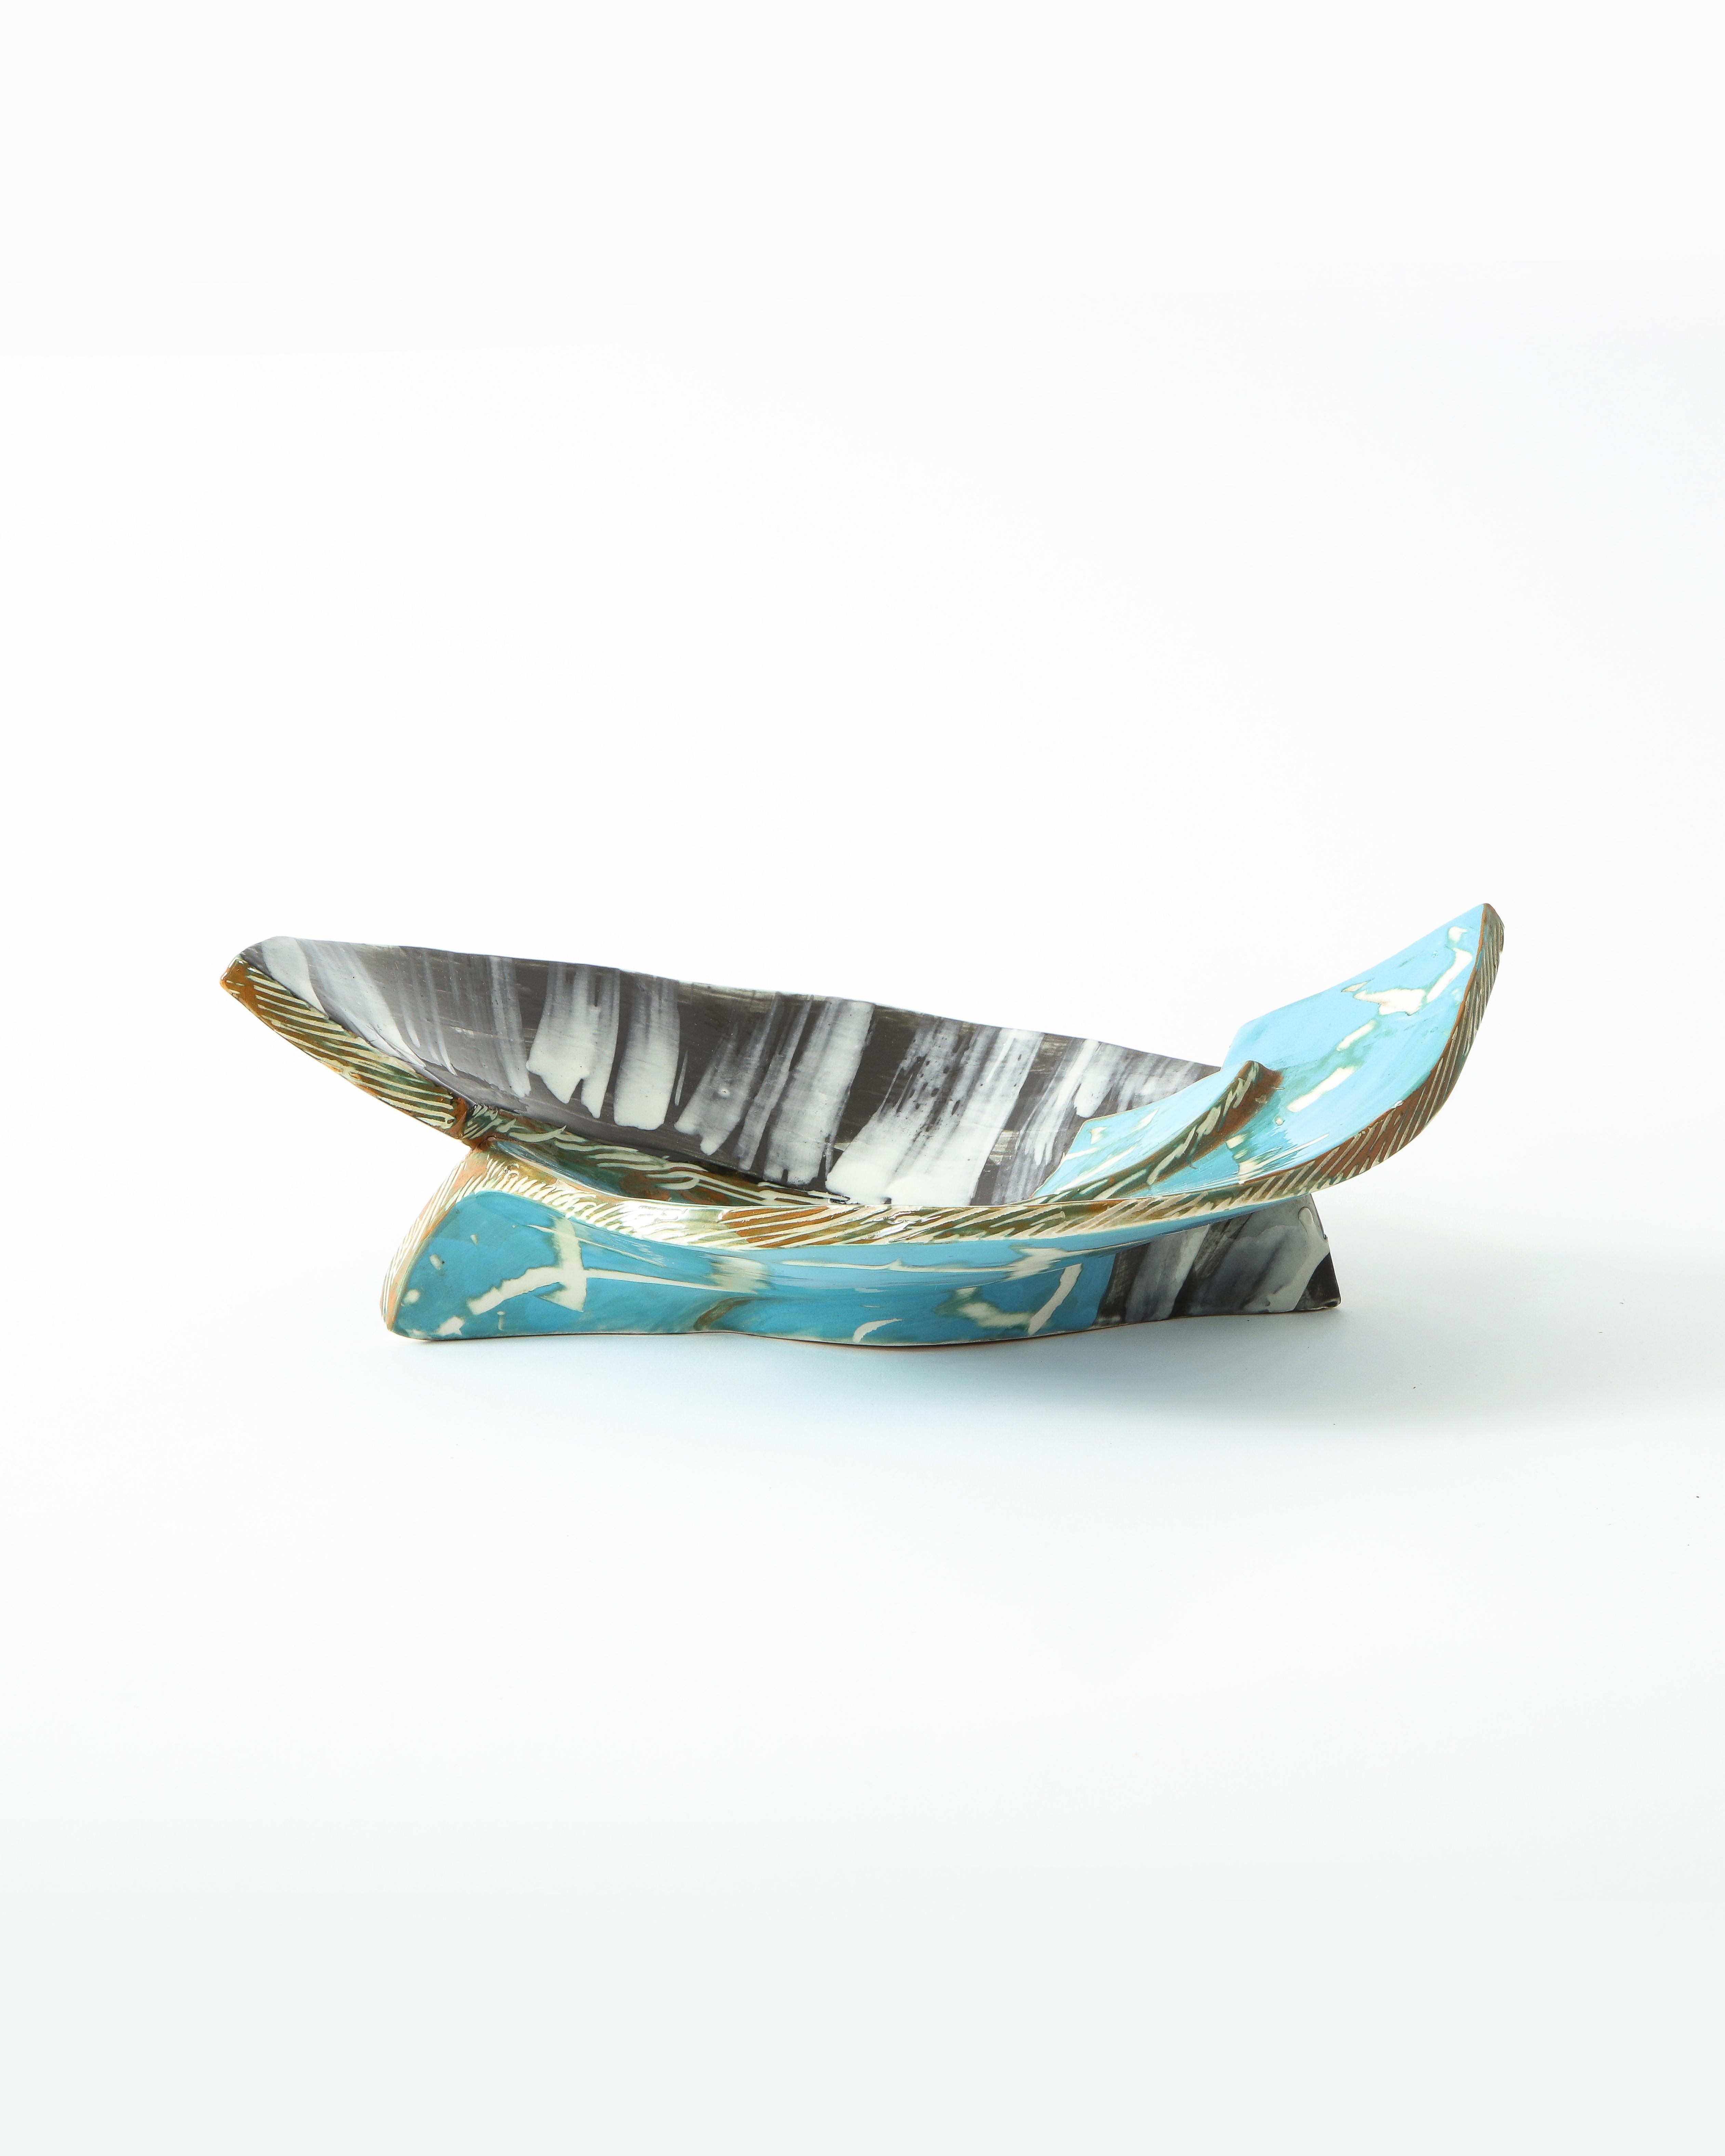 Vide poche with two vibrant turquoise curved forms in contrast with an opposing a black curve detailed with thick white brushstrokes. This catch-all is sophisticated on its own or could be used as a functional piece. Artist signature